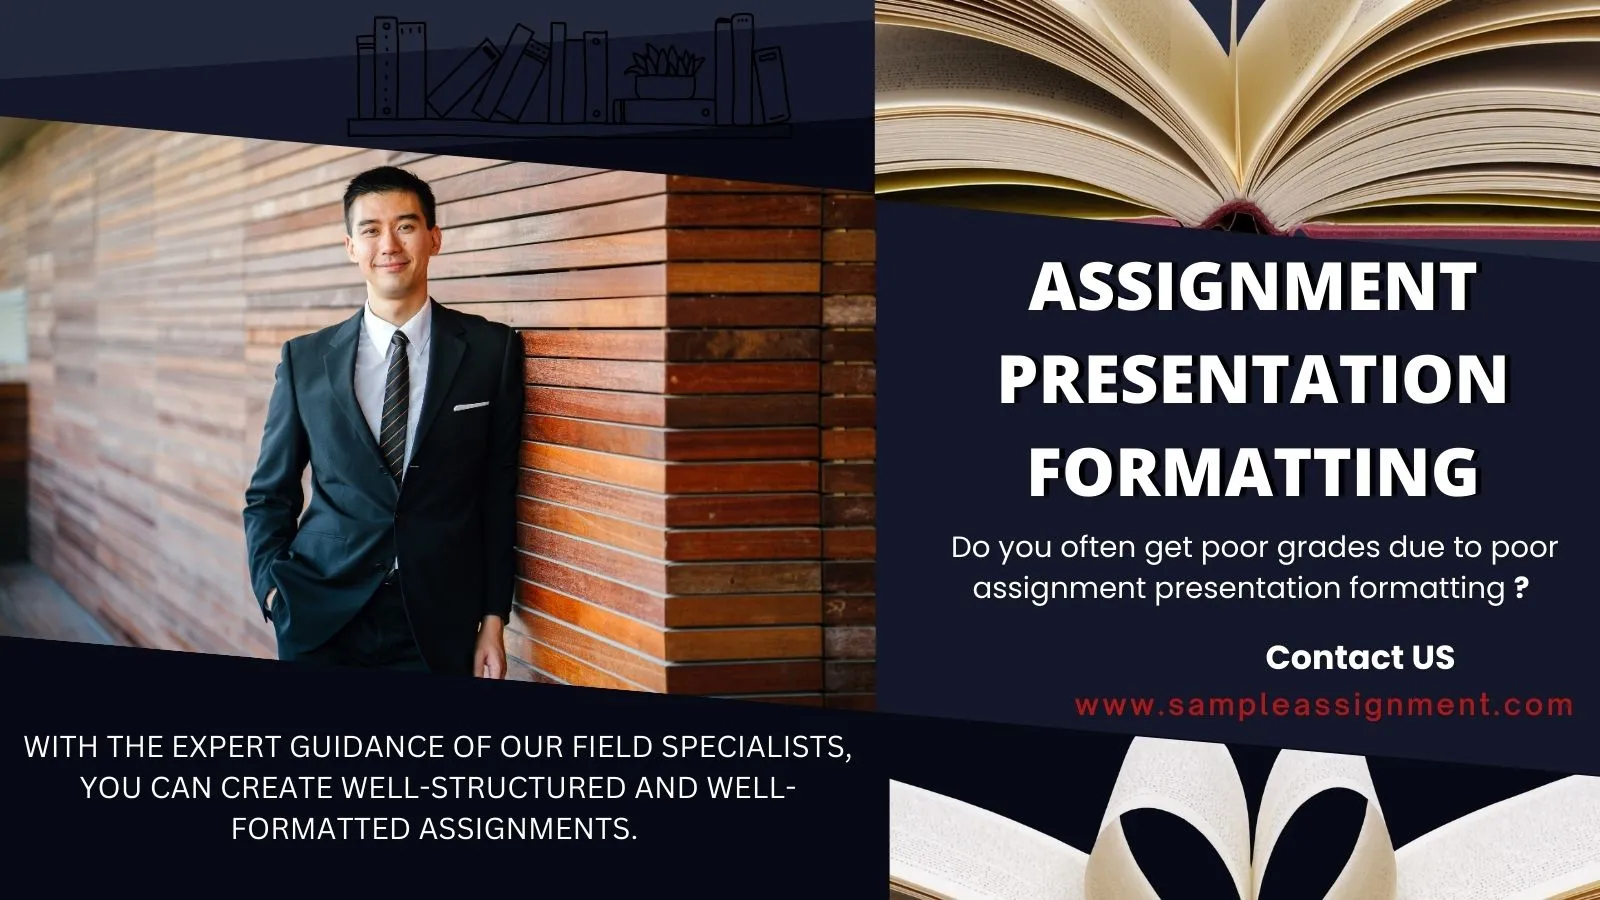 In-depth Overview of Assignment Presentation Formatting